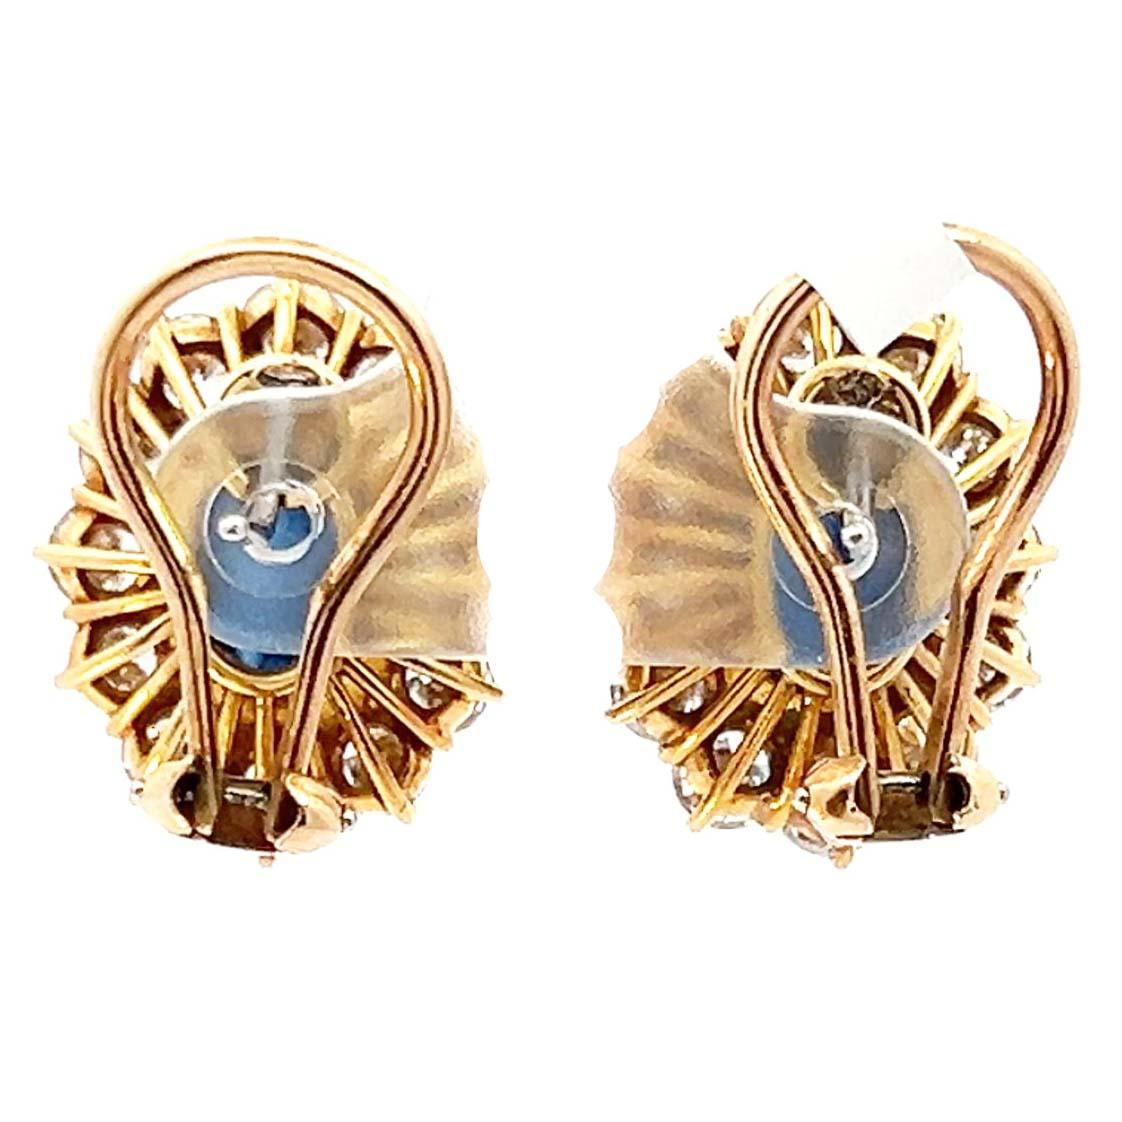 Retro Van Cleef & Arpels 18K Yellow Gold Cabochon Blue Sapphire And Diamond Earrings For Sale